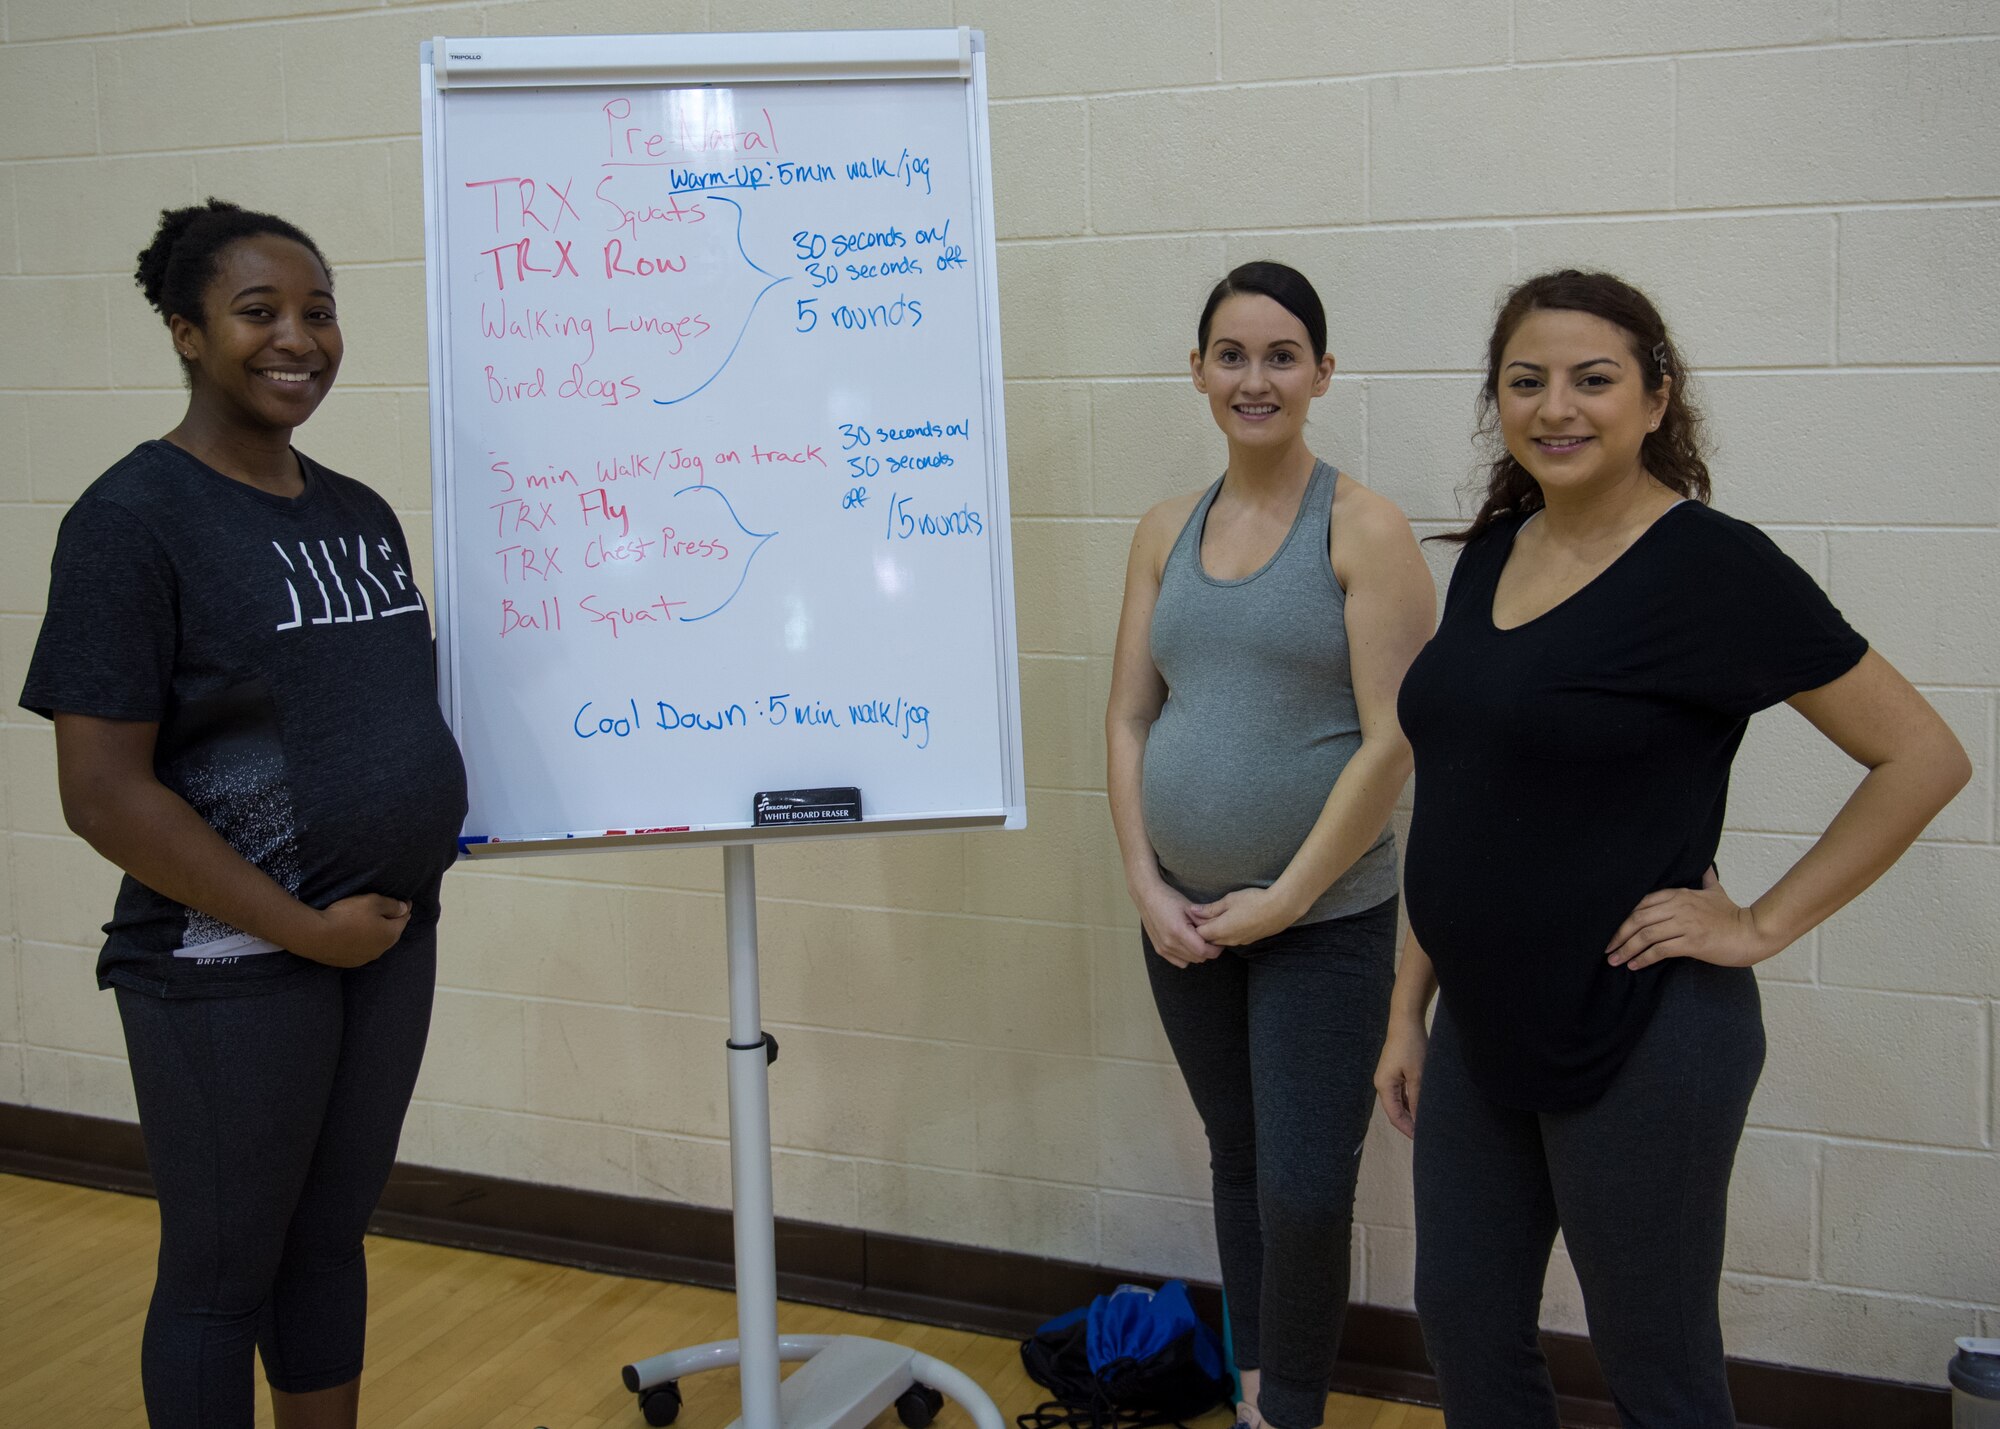 Participants in the prenatal fitness class pose for a photo at Joint Base Langley-Eustis, Virginia, Jan. 13, 2020.